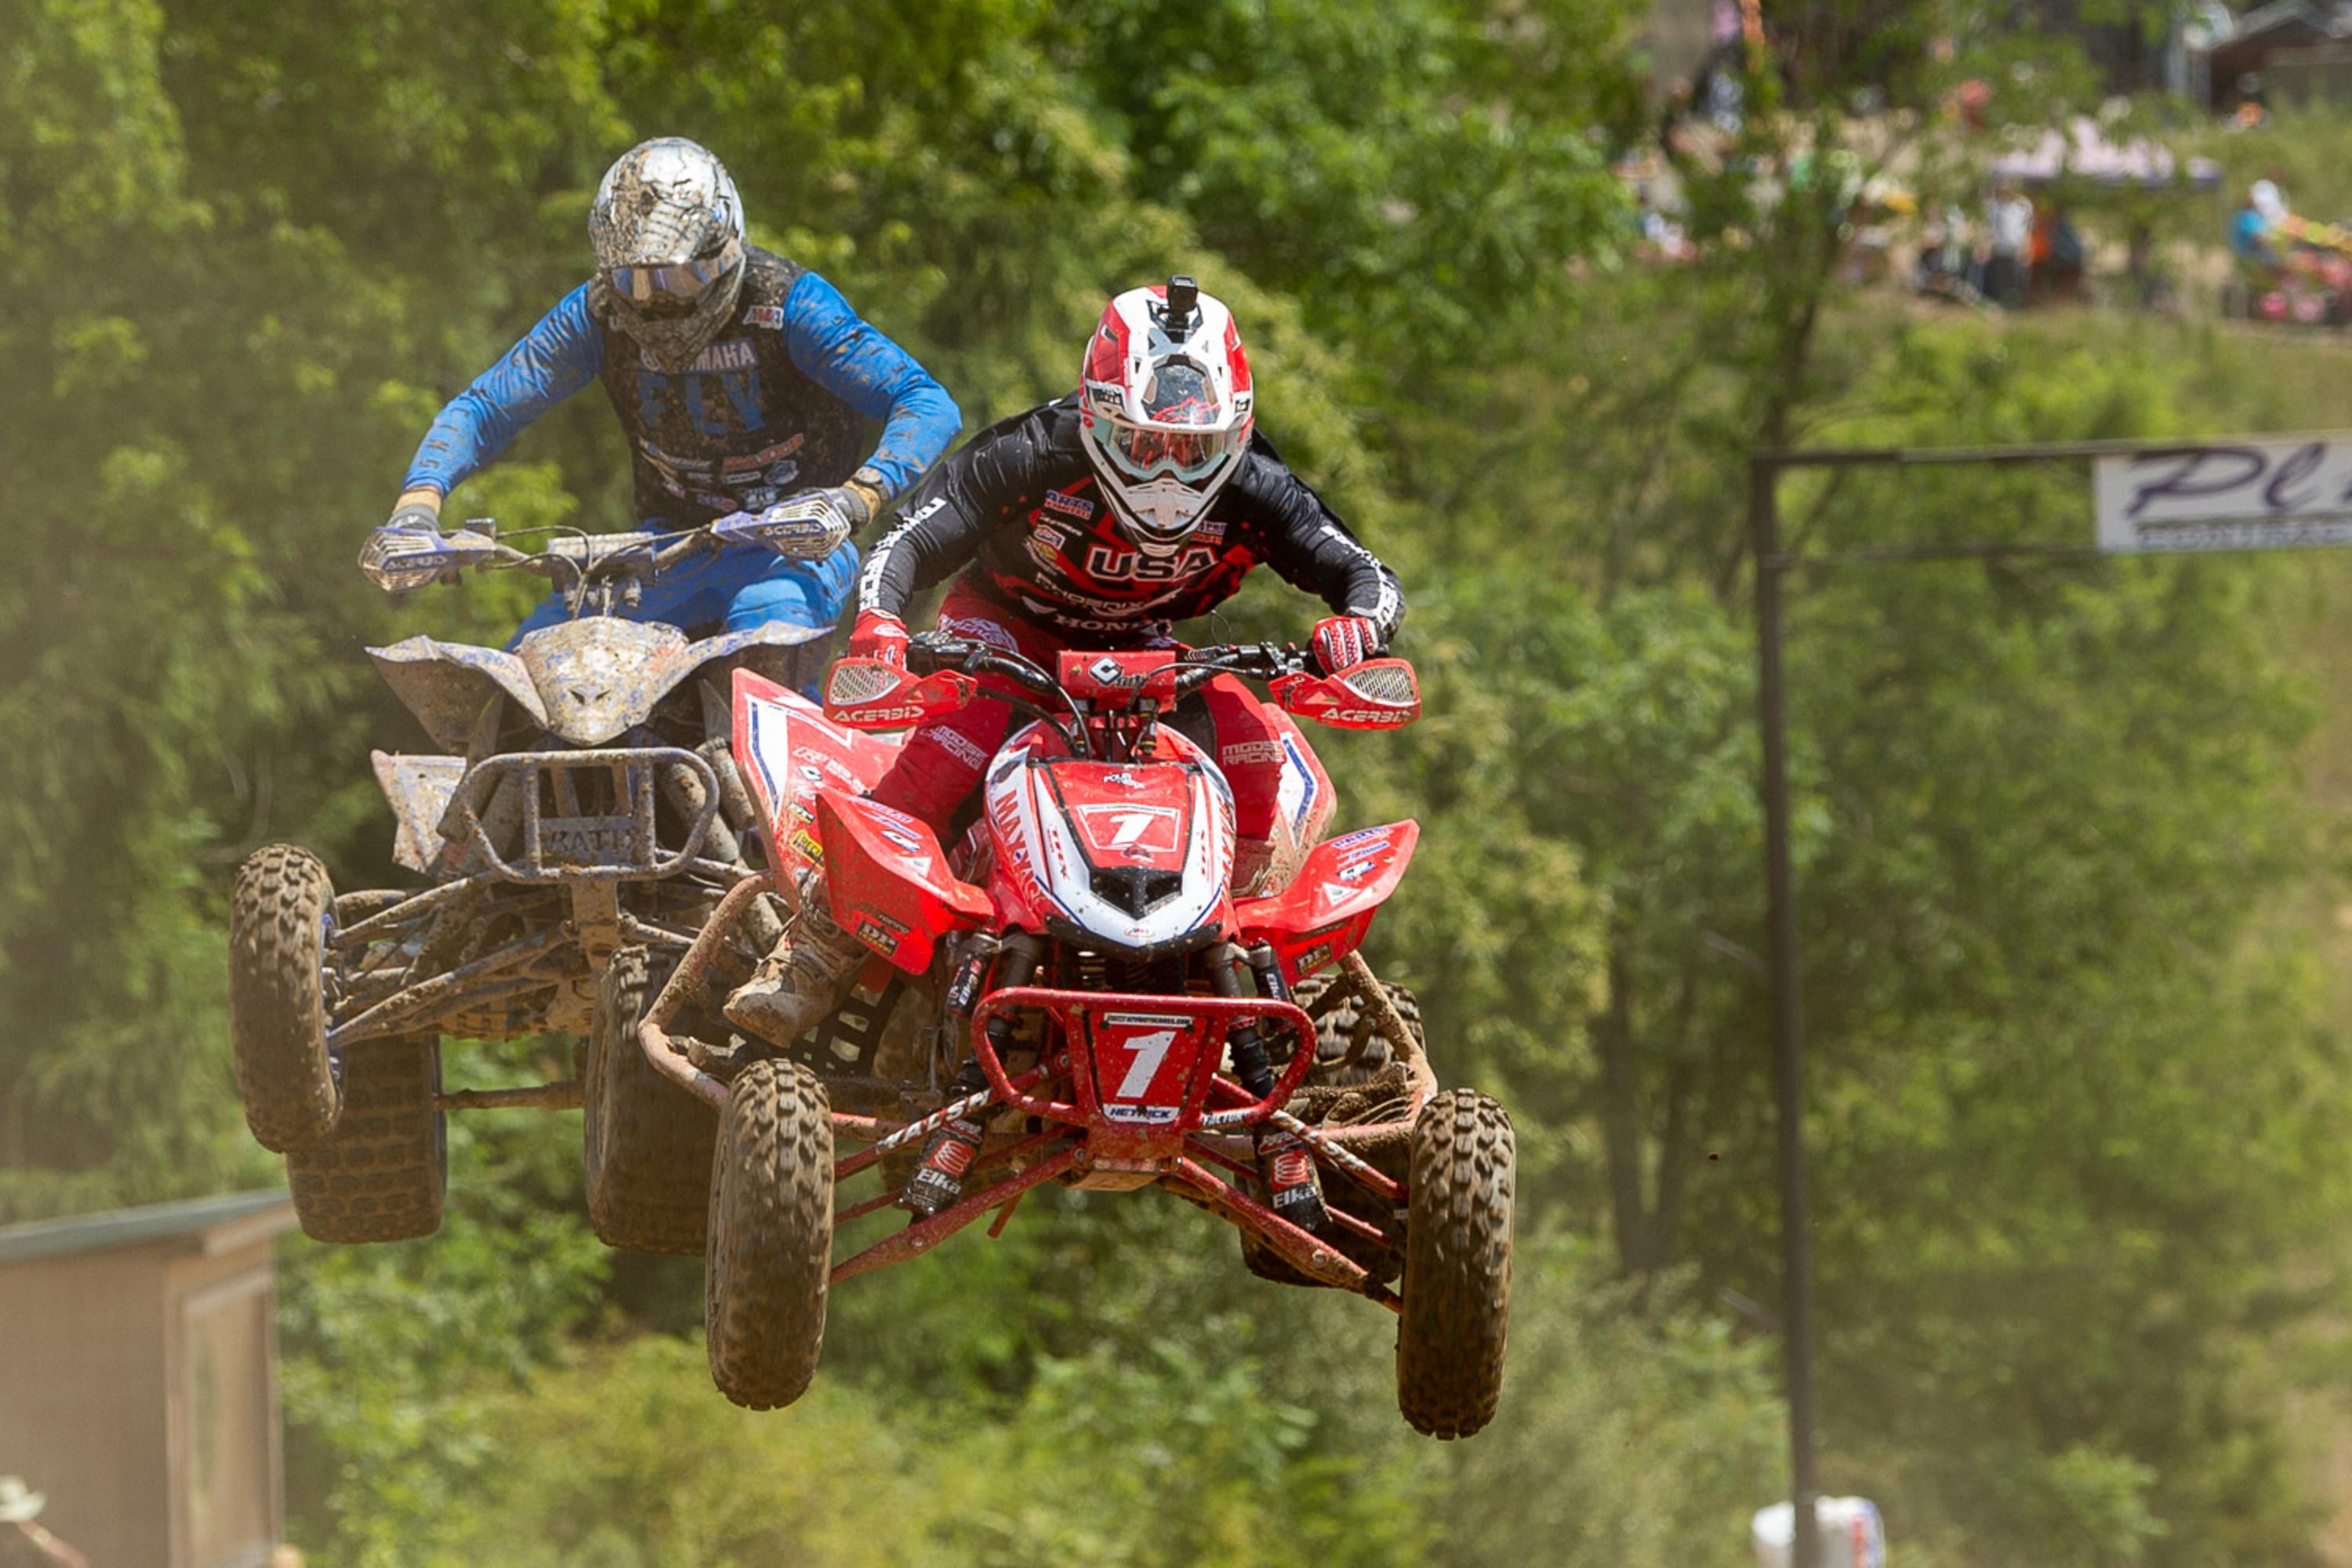 RLT Competition Bulletin 2020-14: Update to Pro Motocross, Loretta Lynn, GNCC and ATVMX Schedules